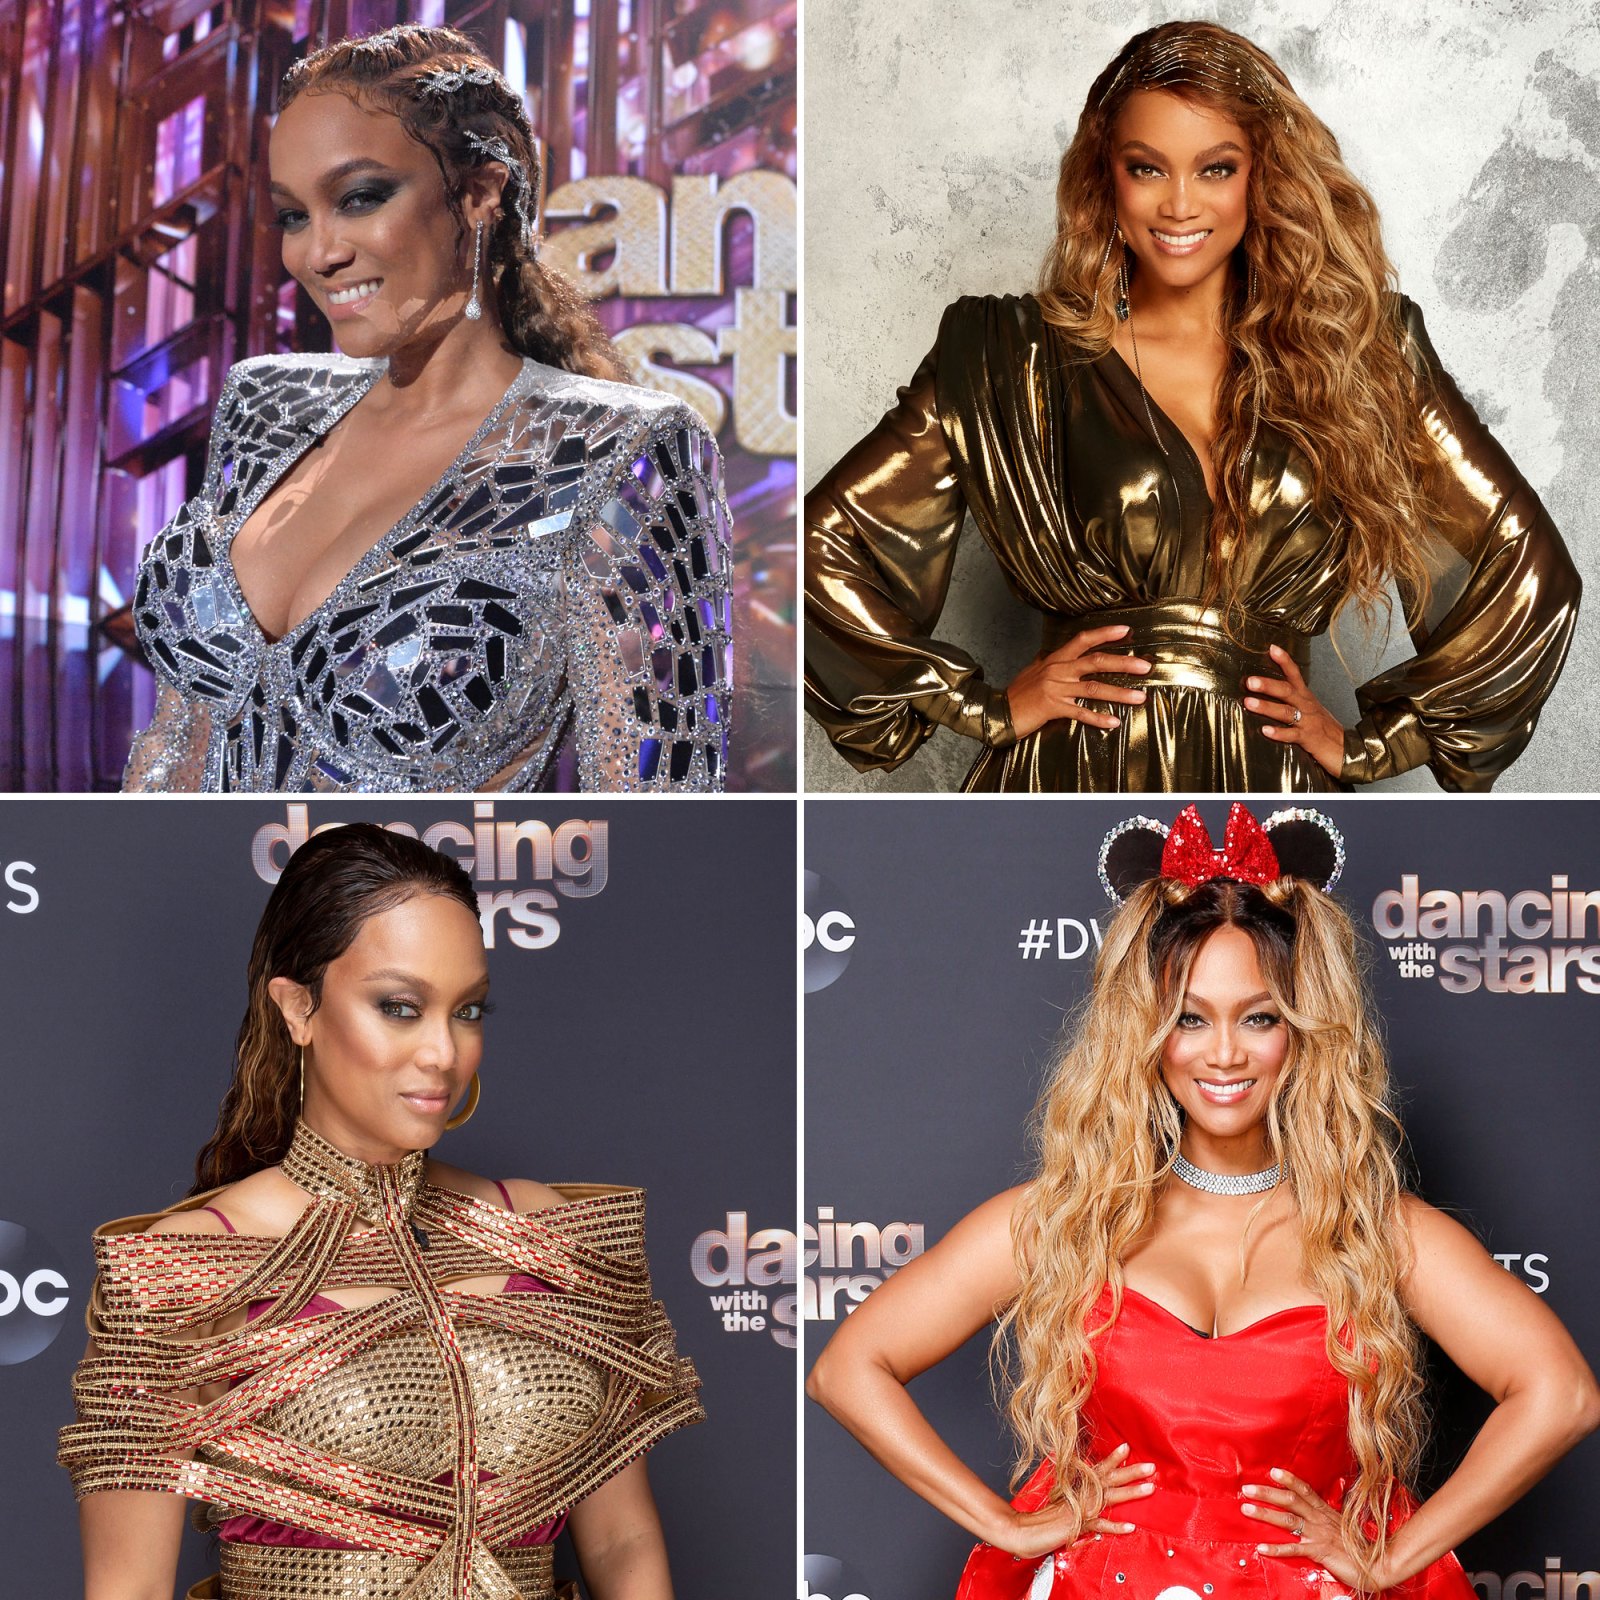 Tyra Banks Dancing With the Stars Wildest Fashion Moments Feature